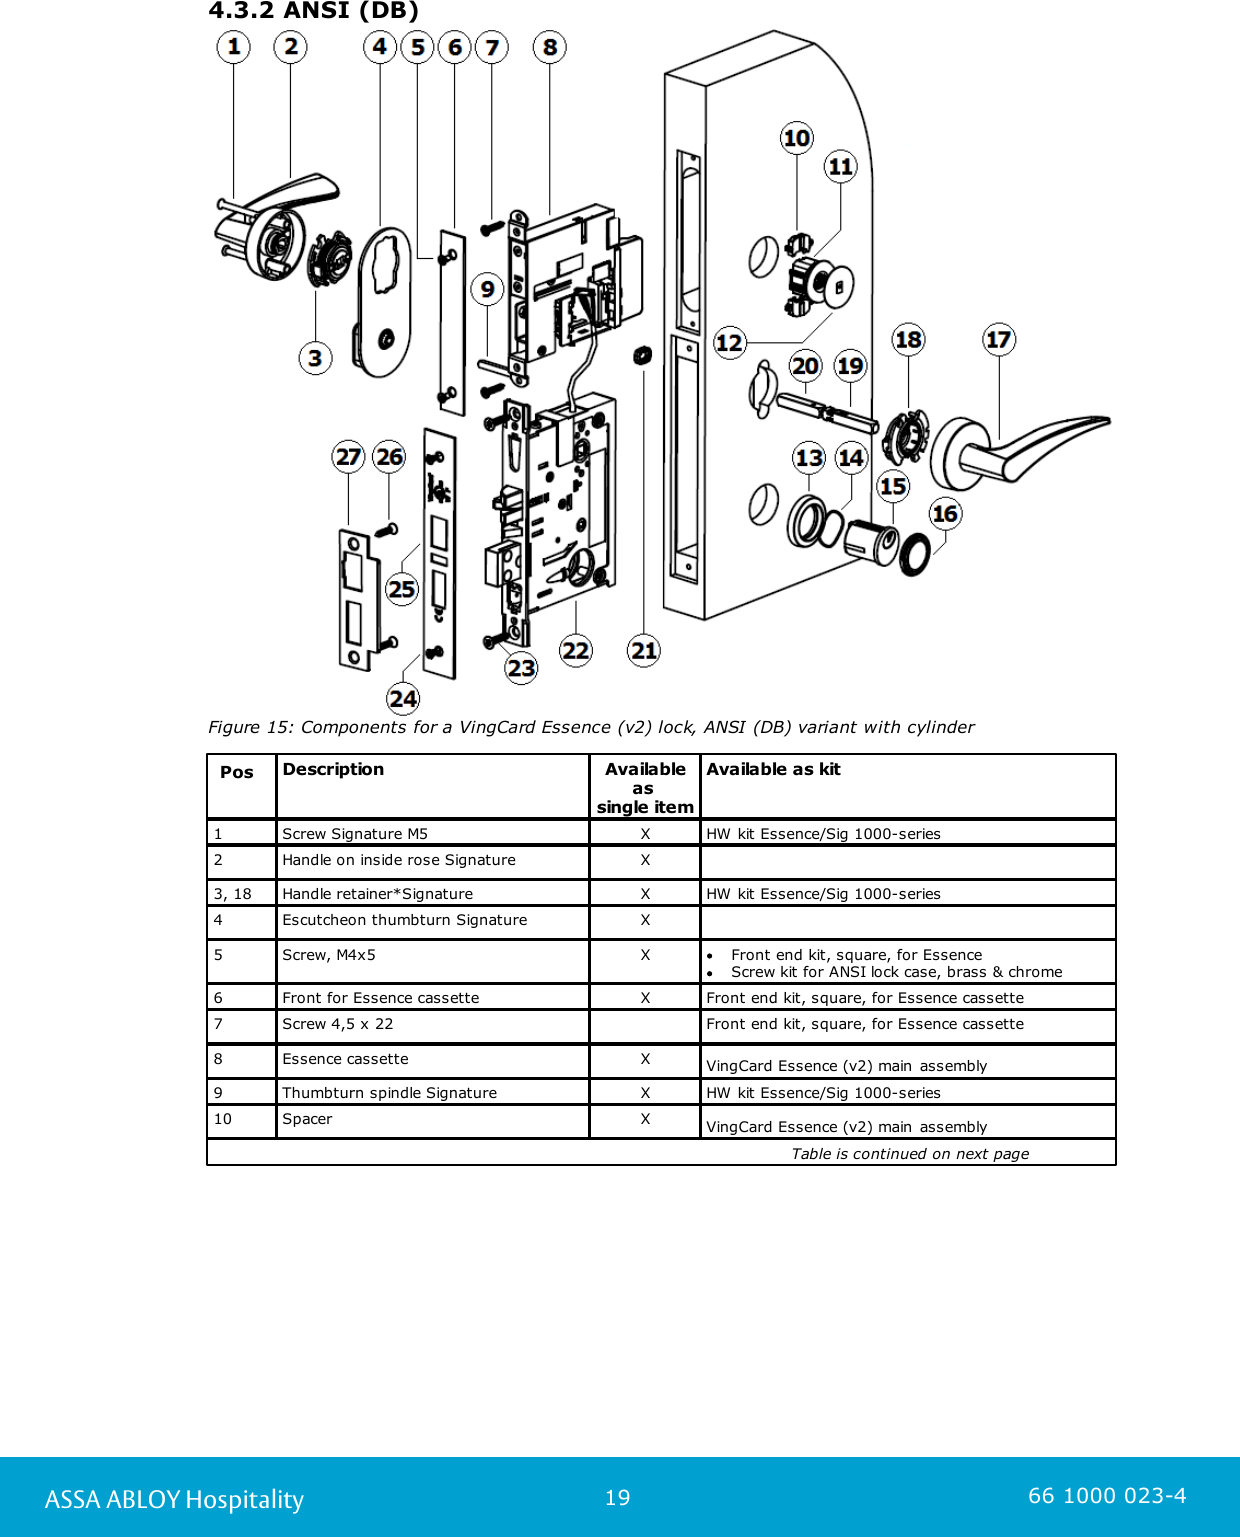 19ASSA ABLOY Hospitality 66 1000 023-44.3.2 ANSI (DB)Figure 15: Components for a VingCard Essence (v2) lock, ANSI (DB) variant with cylinder PosDescriptionAvailableas single itemAvailable as kit1Screw Signature M5 XHW kit Essence/Sig 1000-series2Handle on inside rose Signature X3, 18Handle retainer*Signature XHW kit Essence/Sig 1000-series4Escutcheon thumbturn SignatureX5Screw, M4x5XFront end kit, square, for Essence Screw kit for ANSI lock case, brass &amp; chrome6Front for Essence cassetteXFront end kit, square, for Essence cassette7Screw 4,5 x 22Front end kit, square, for Essence cassette8Essence cassette XVingCard Essence (v2) main assembly9Thumbturn spindle SignatureXHW kit Essence/Sig 1000-series10SpacerXVingCard Essence (v2) main assembly                                                                                                               Table is continued on next page